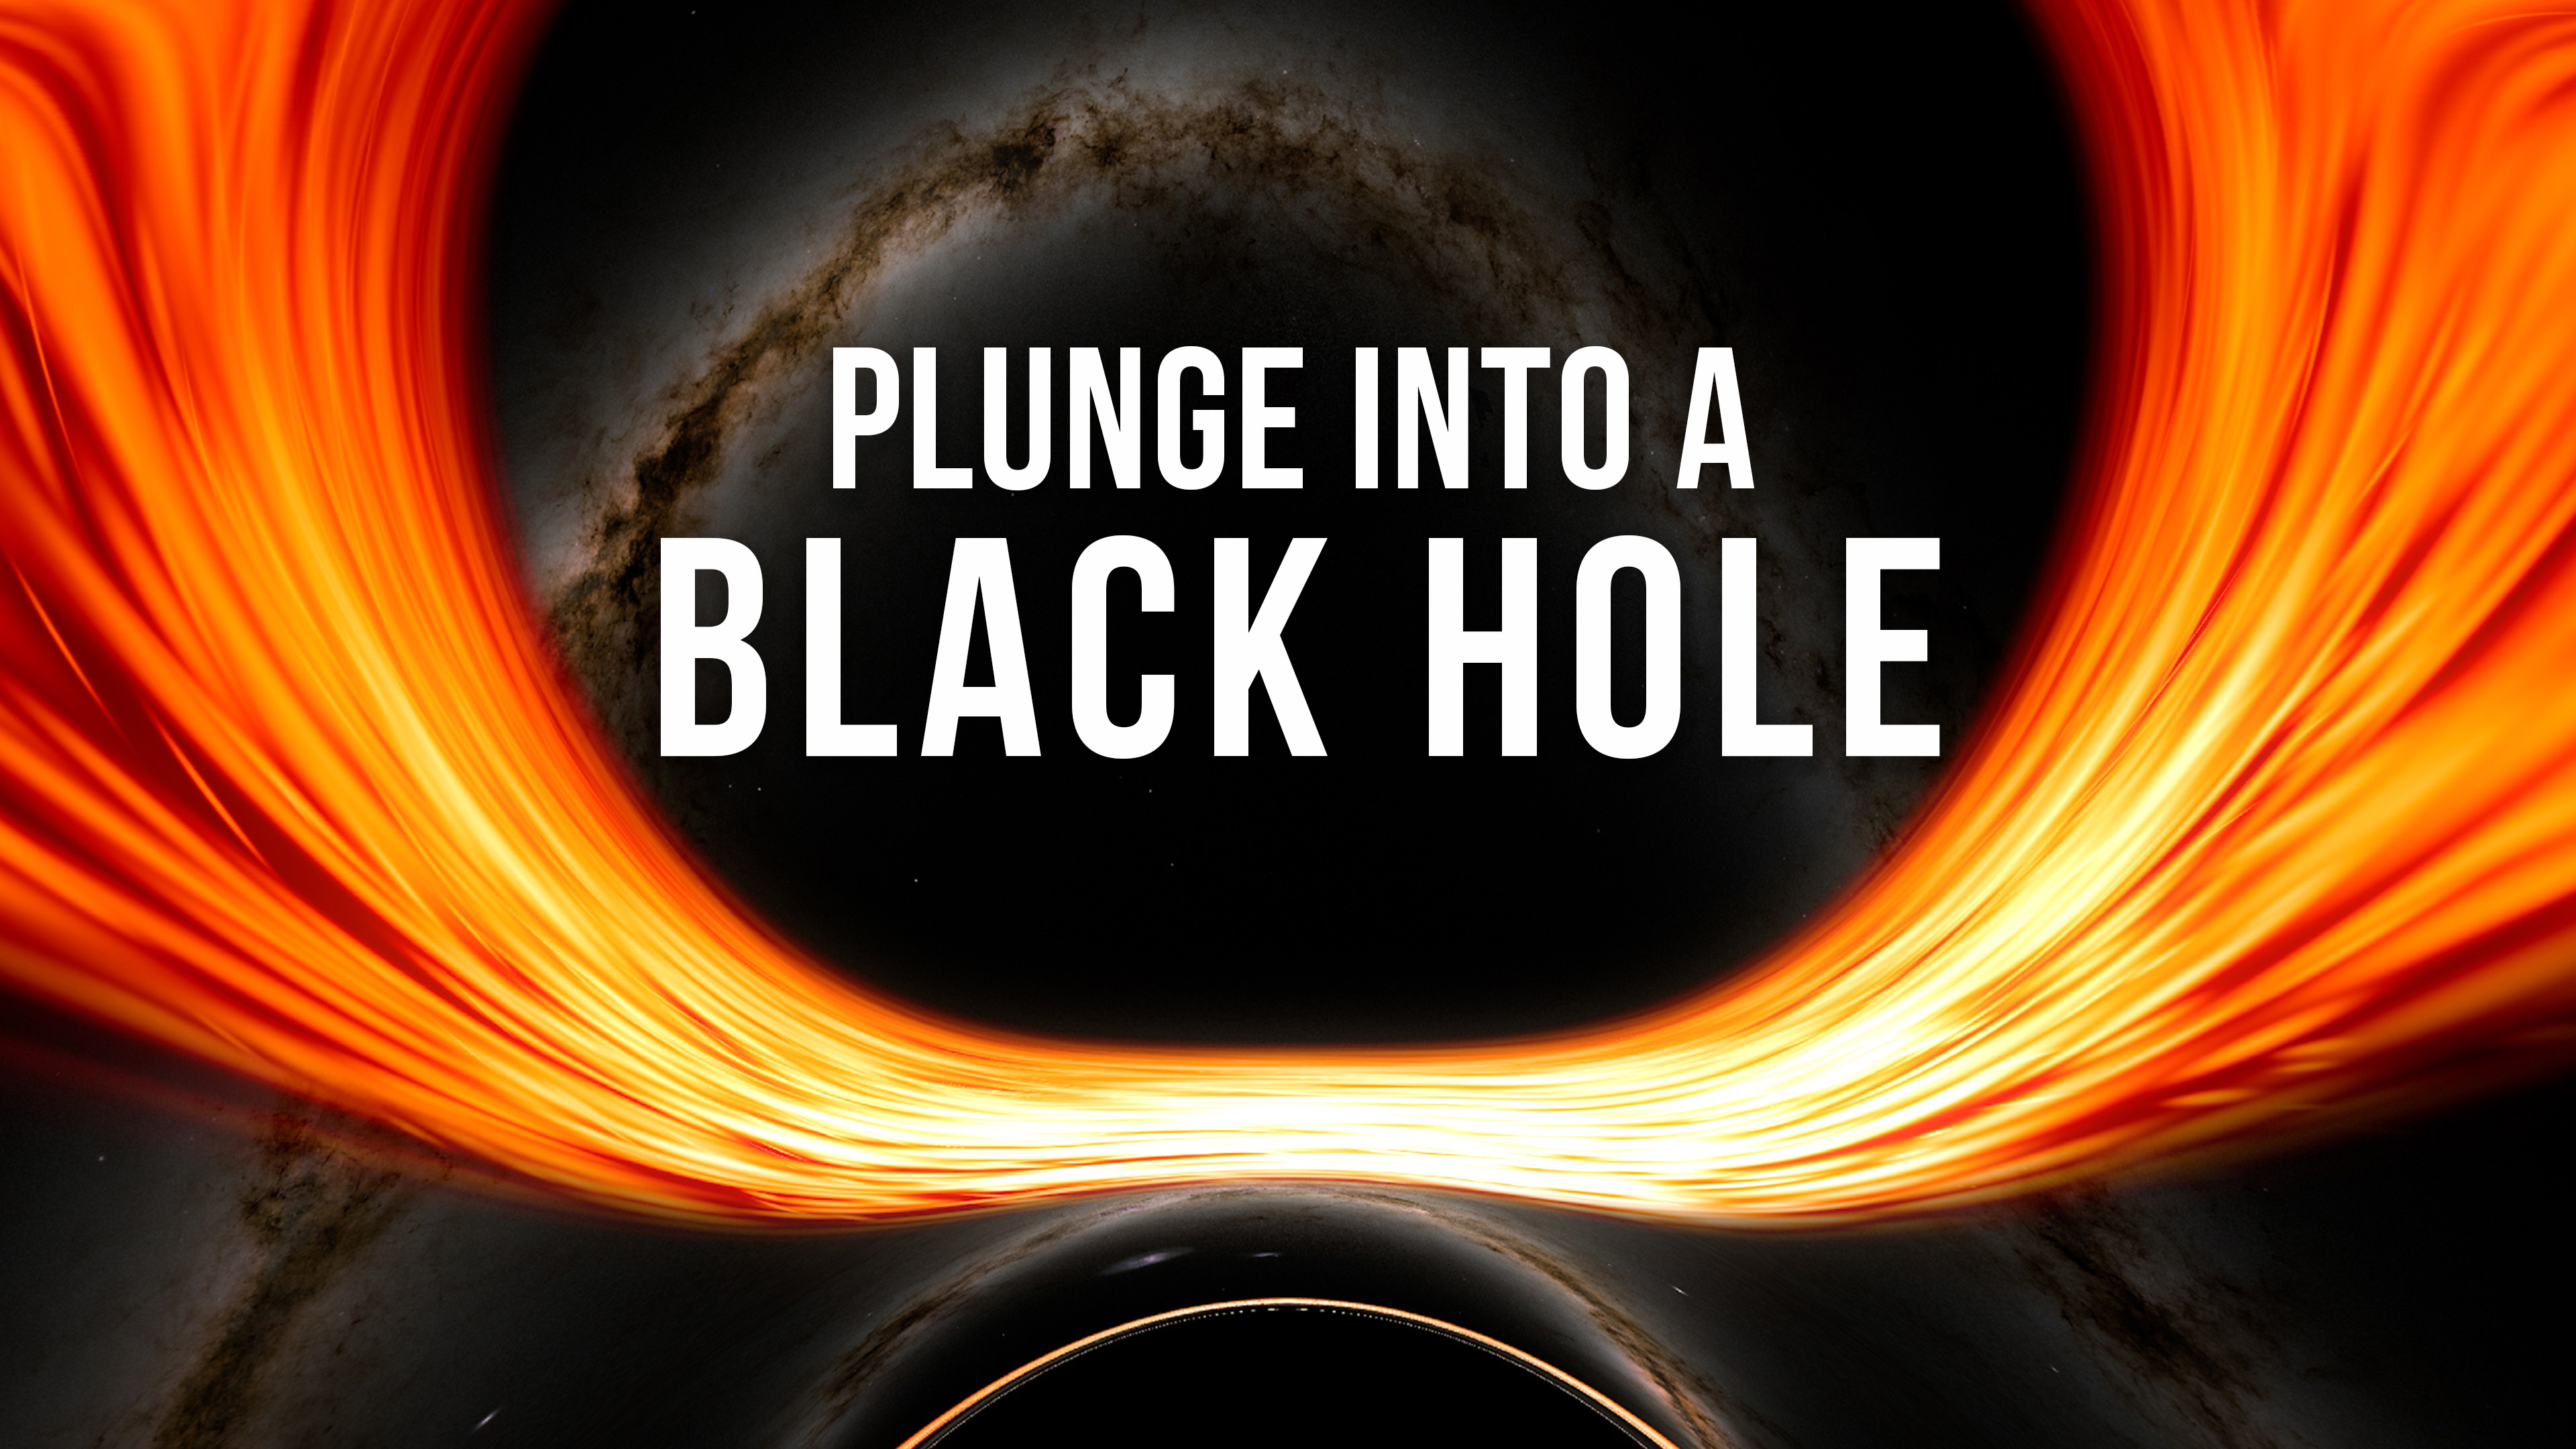 In this flight toward a supermassive black hole, labels highlight many of the fascinating features produced by the effects of general relativity along the way. This supercomputer visualization tracks a camera as it approaches, briefly orbits, and then crosses the event horizon &mdash; the point of no return &mdash; of a supersized black hole similar in mass to the one at the center of our galaxy.  Credit: NASA's Goddard Space Flight Center/J. Schnittman and B. PowellMusic: “Tidal Force,” Thomas Daniel Bellingham [PRS], Universal Production Music“Memories” from Digital Juice“Path Finder,” Eric Jacobsen [TONO] and Lorenzo Castellarin [BMI], Universal Production MusicWatch this video on the NASA Goddard YouTube channel.Complete transcript available.